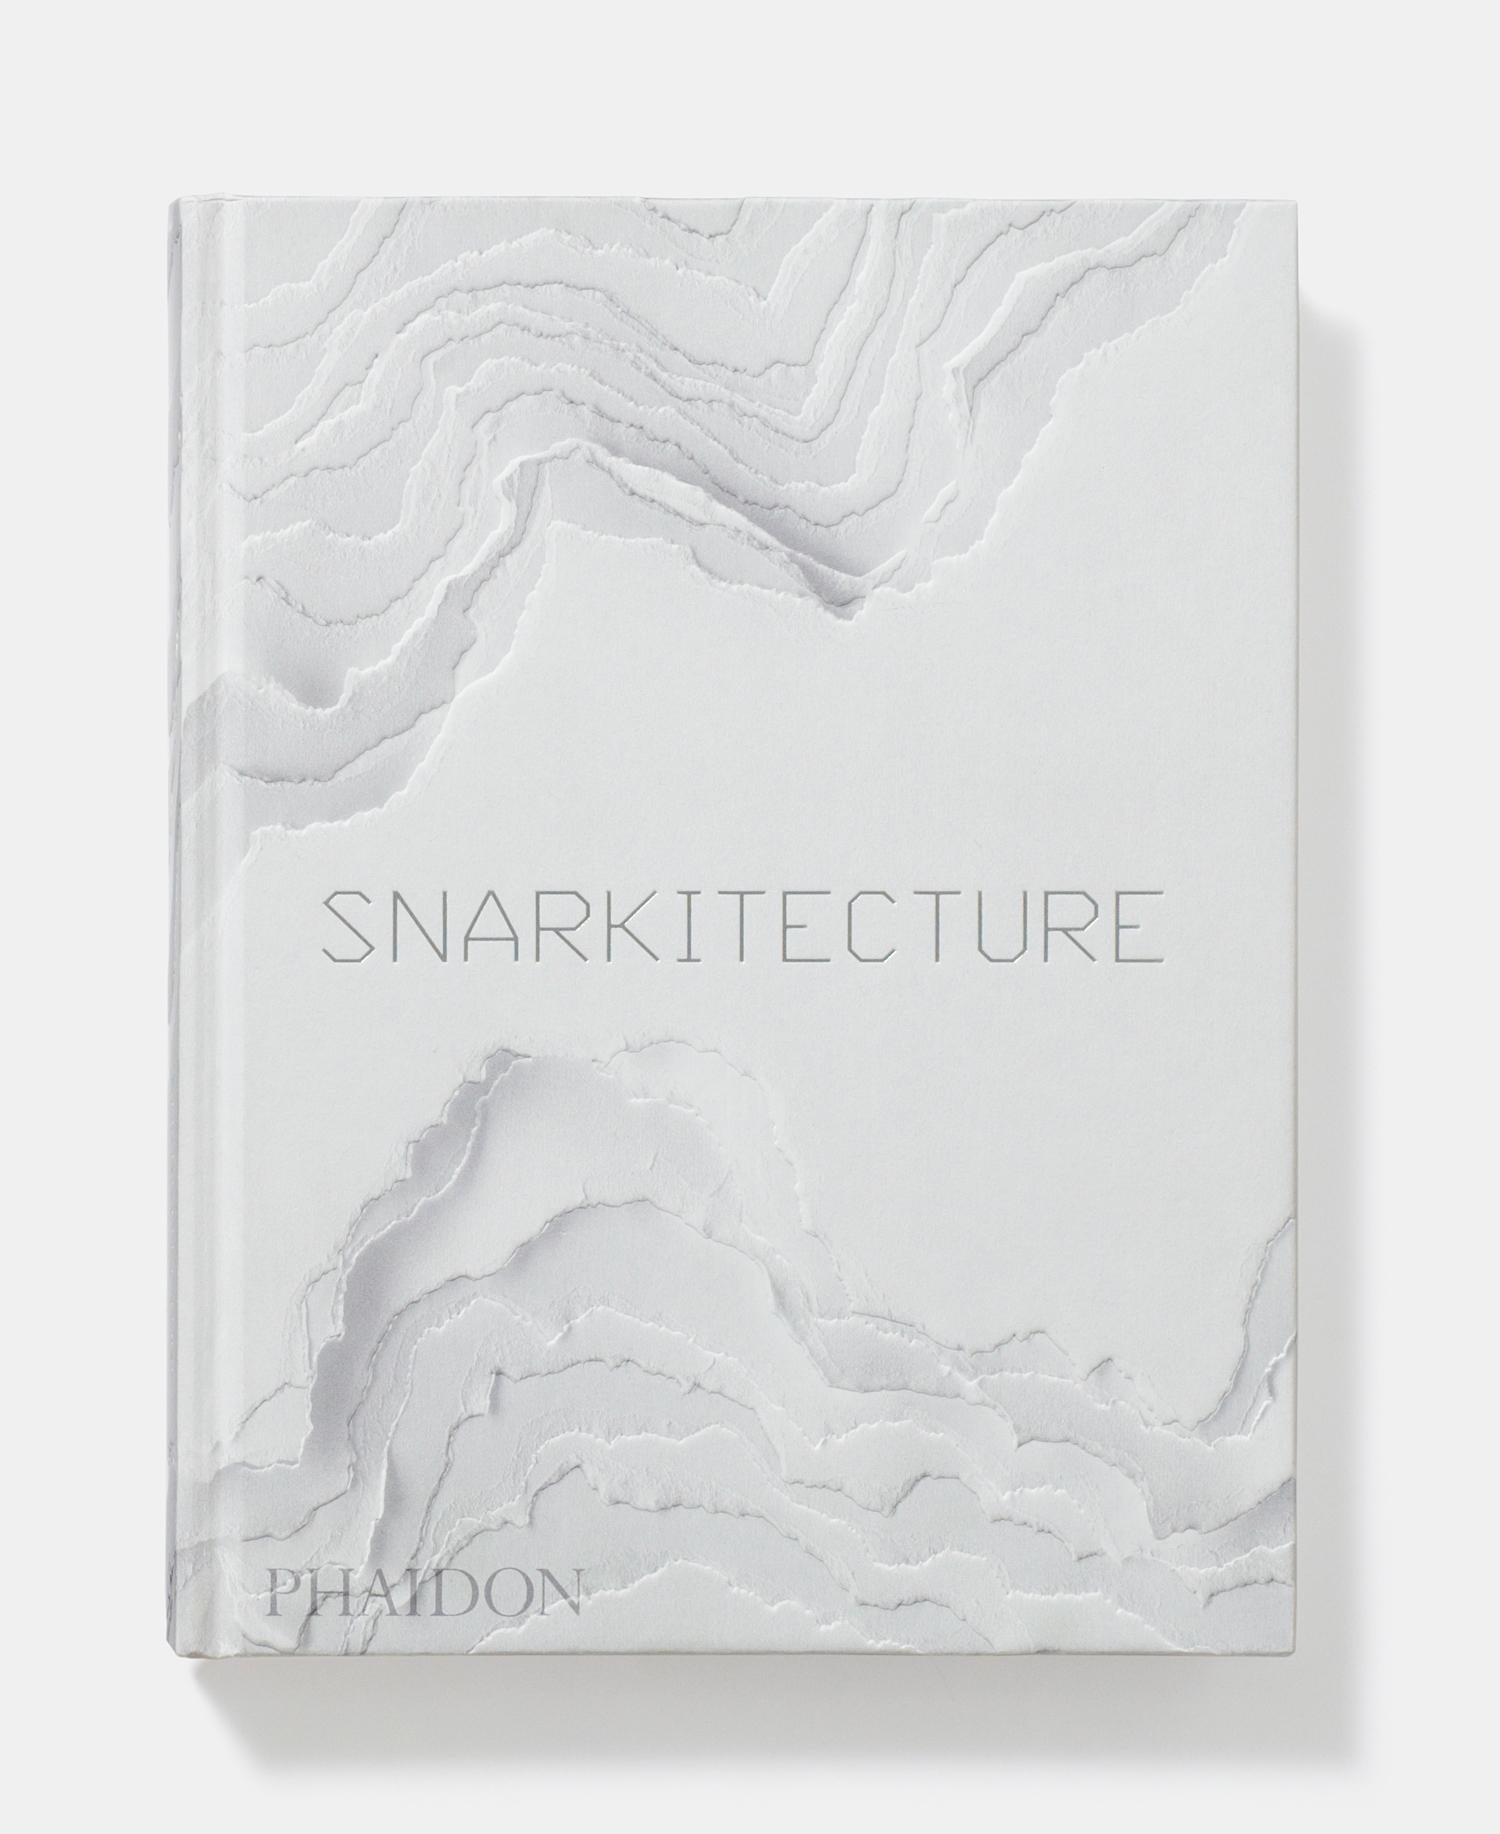 The first monograph on Snarkitecture, a New York-based collaborative and innovative design studio with an introduction by Maria Cristina Didero

Fast becoming one of the world's most sought-after studios, Snarkitecture has designed installations,